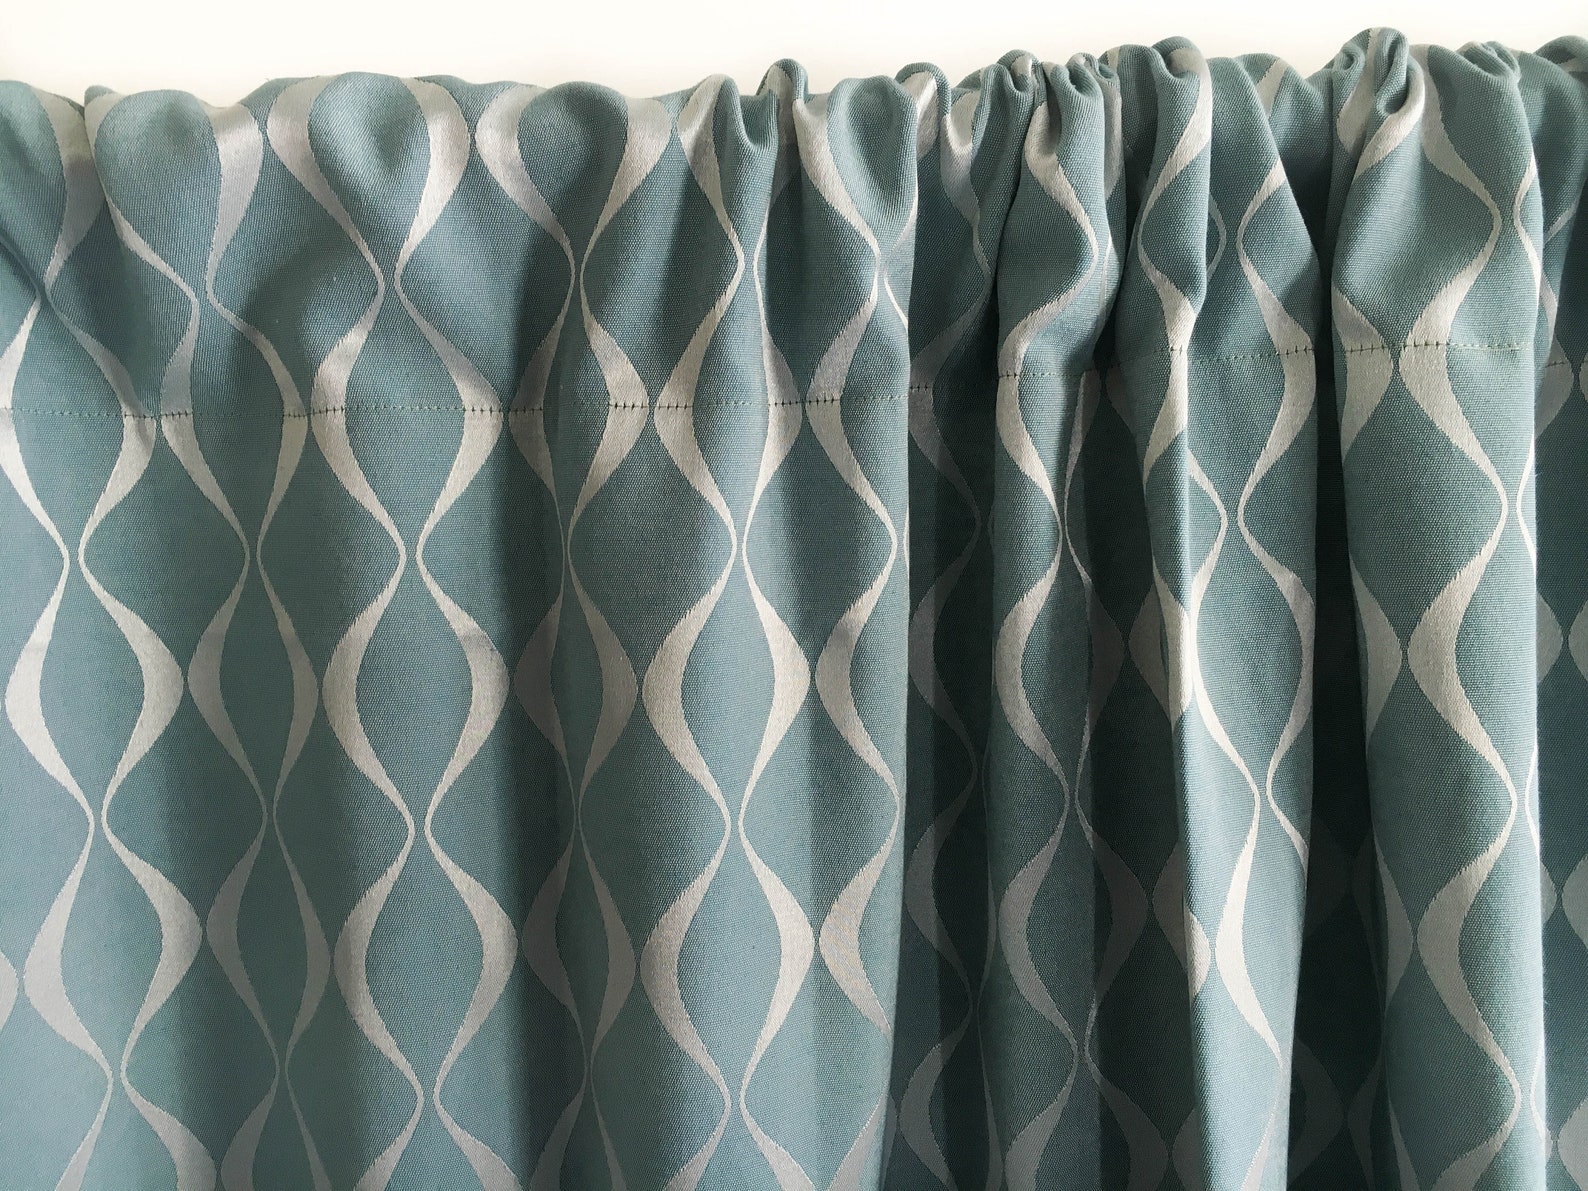 Teal Curtain panel 84 90 96 108 120 inch Teal Grey blackout | Etsy